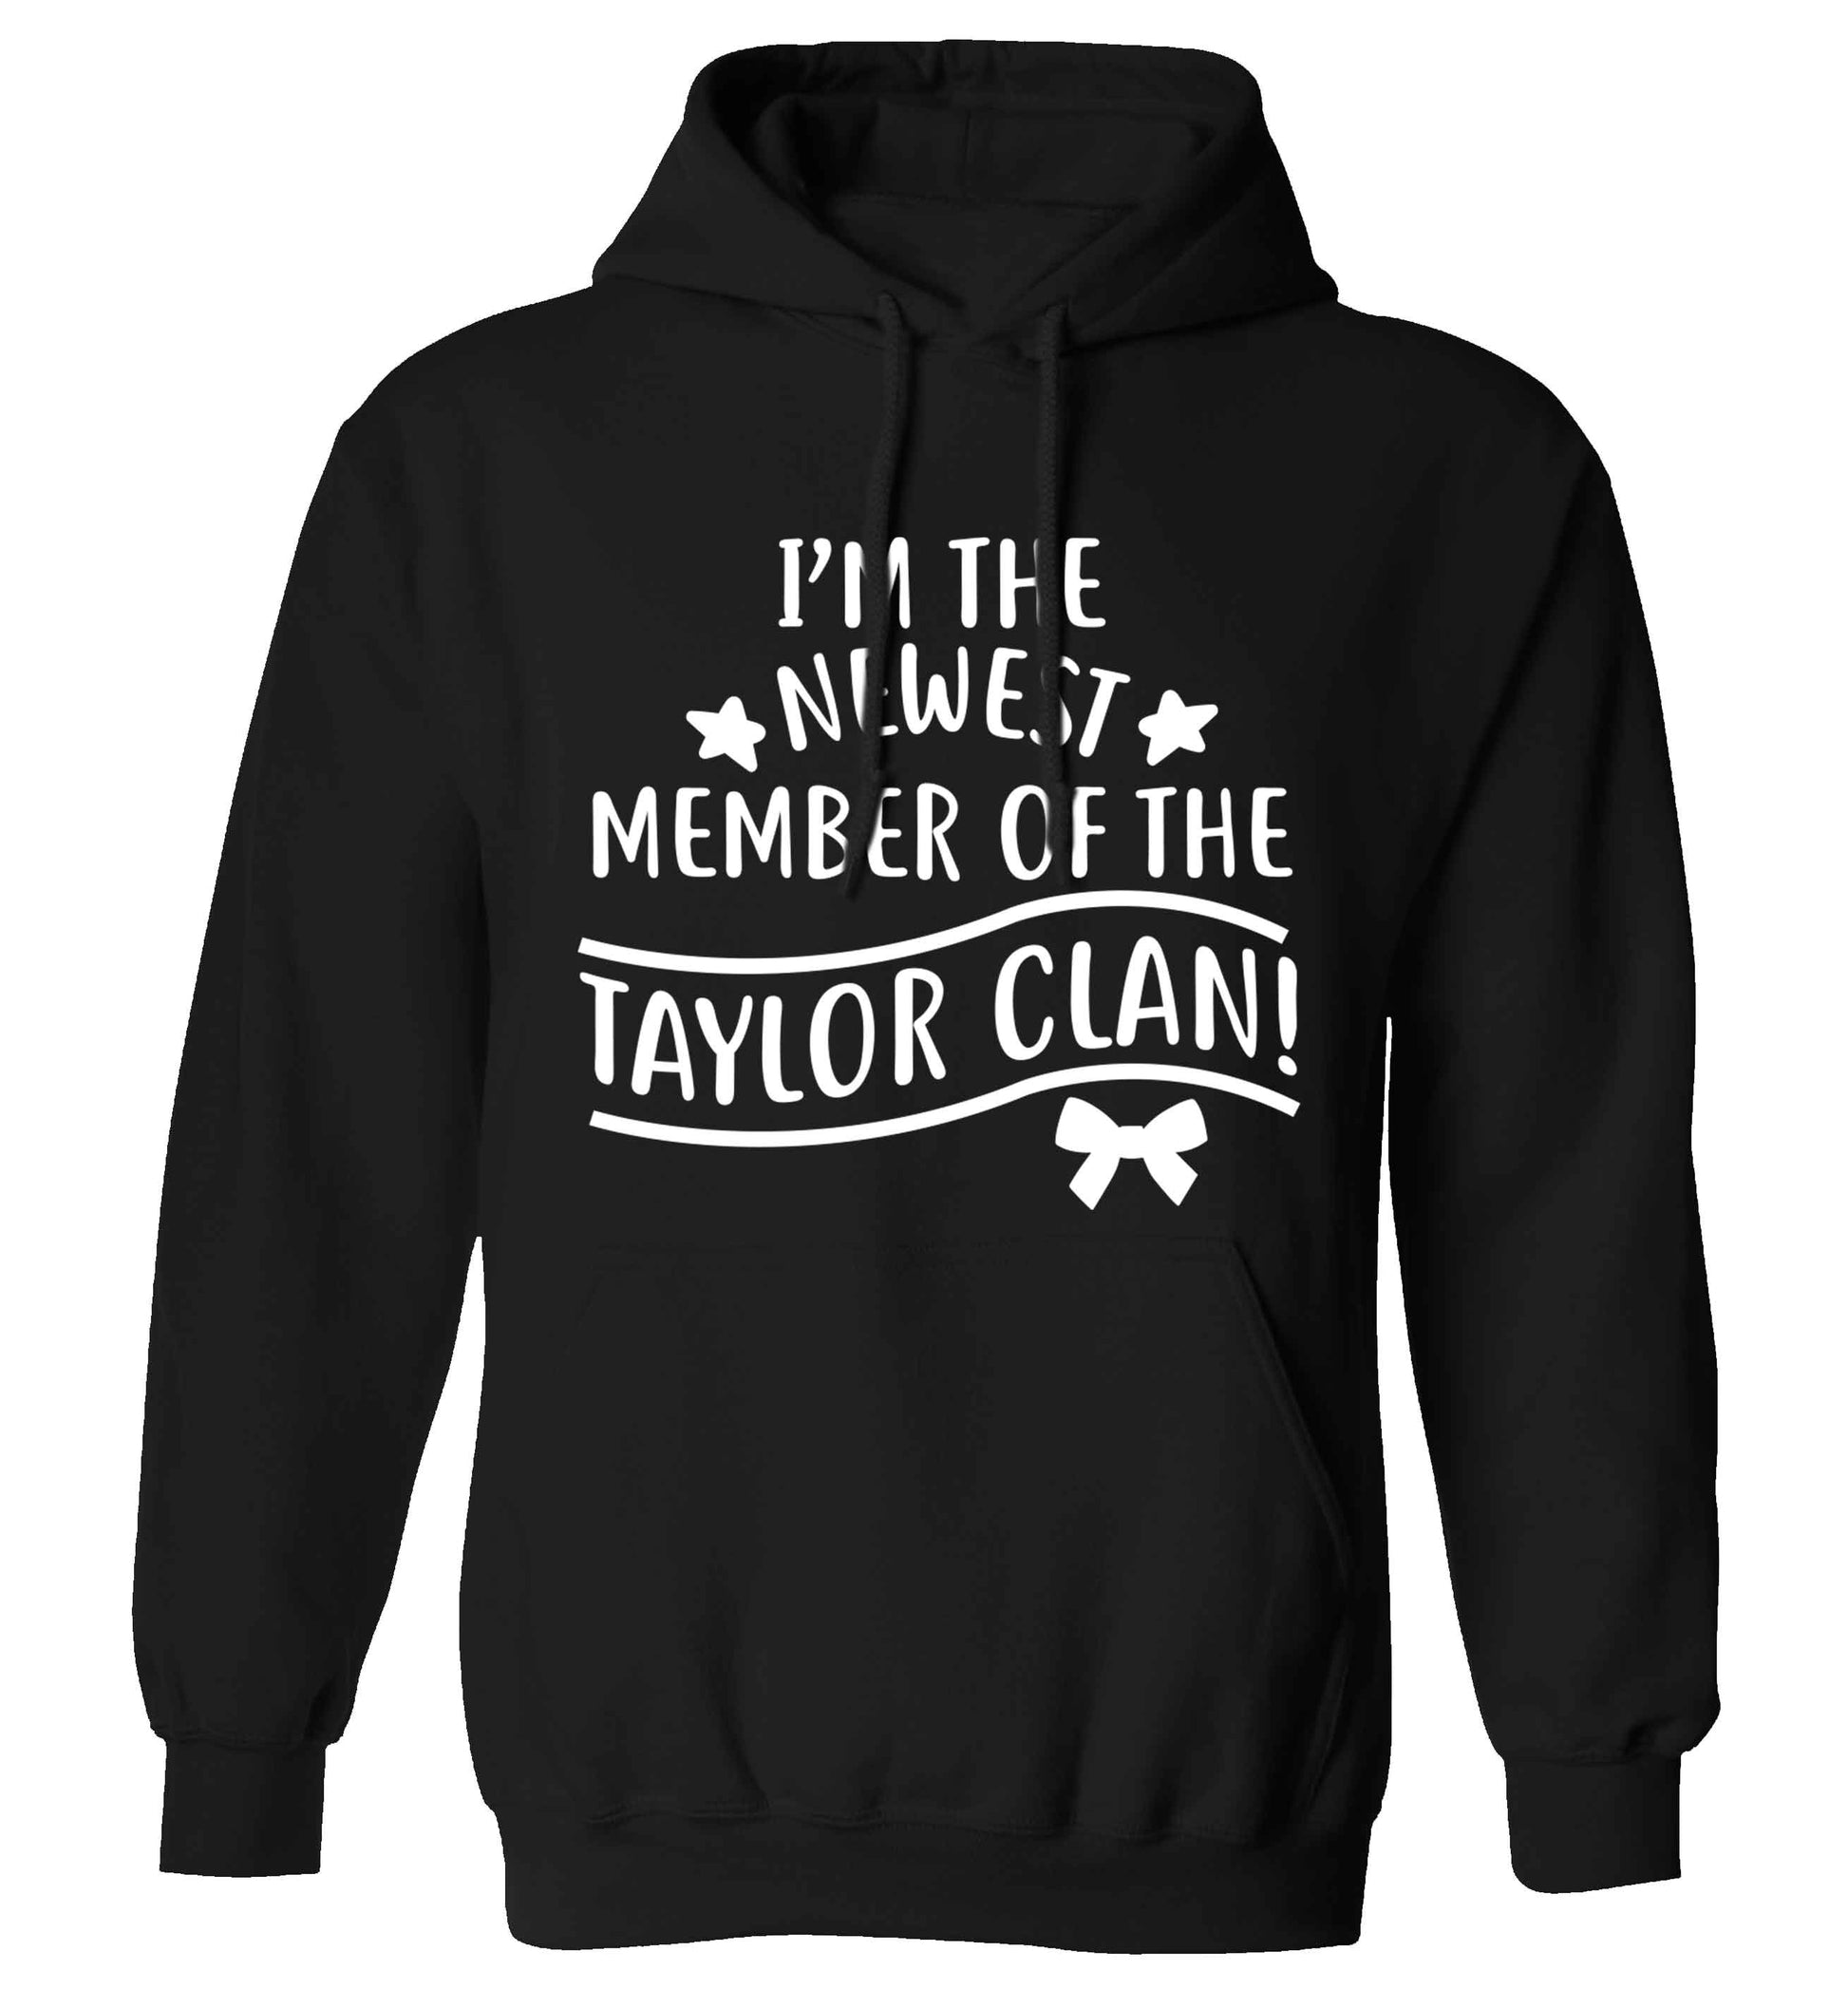 Personalised, newest member of the Taylor clan adults unisex black hoodie 2XL